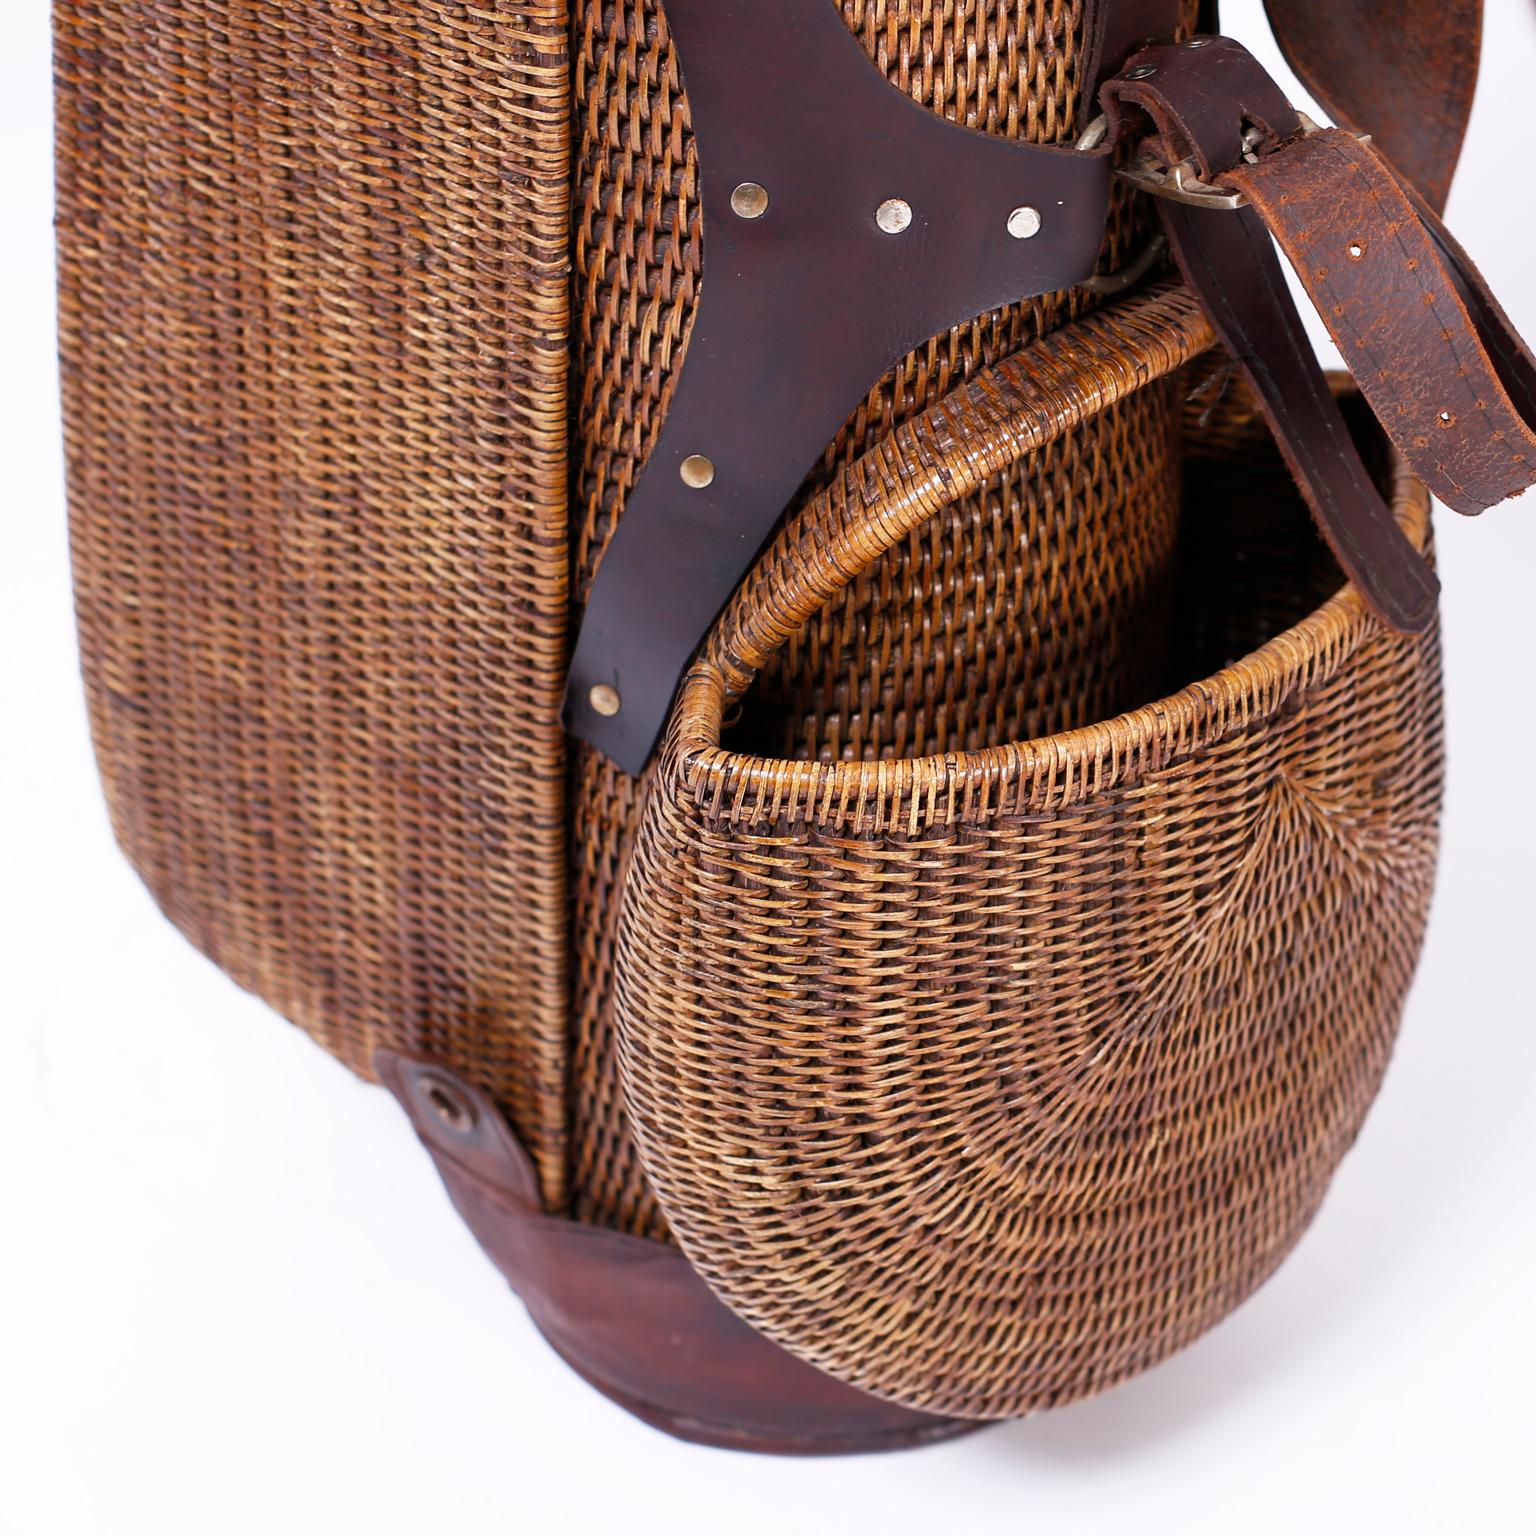 Wicker Vintage British Colonial Style Golf Bag